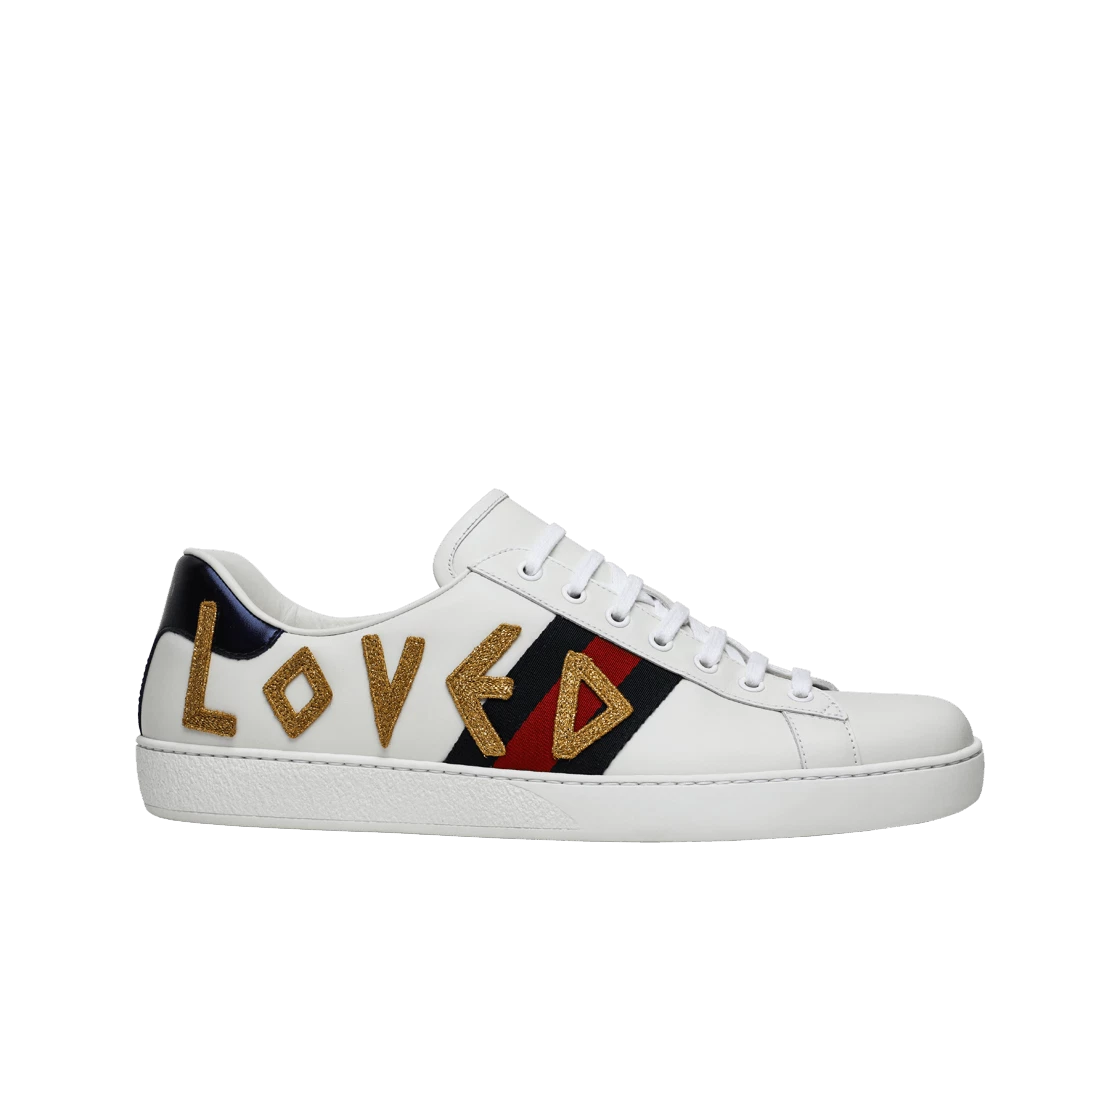 https://d2cva83hdk3bwc.cloudfront.net/gucci-ace-loved-embroidered-sneakers-1.jpg